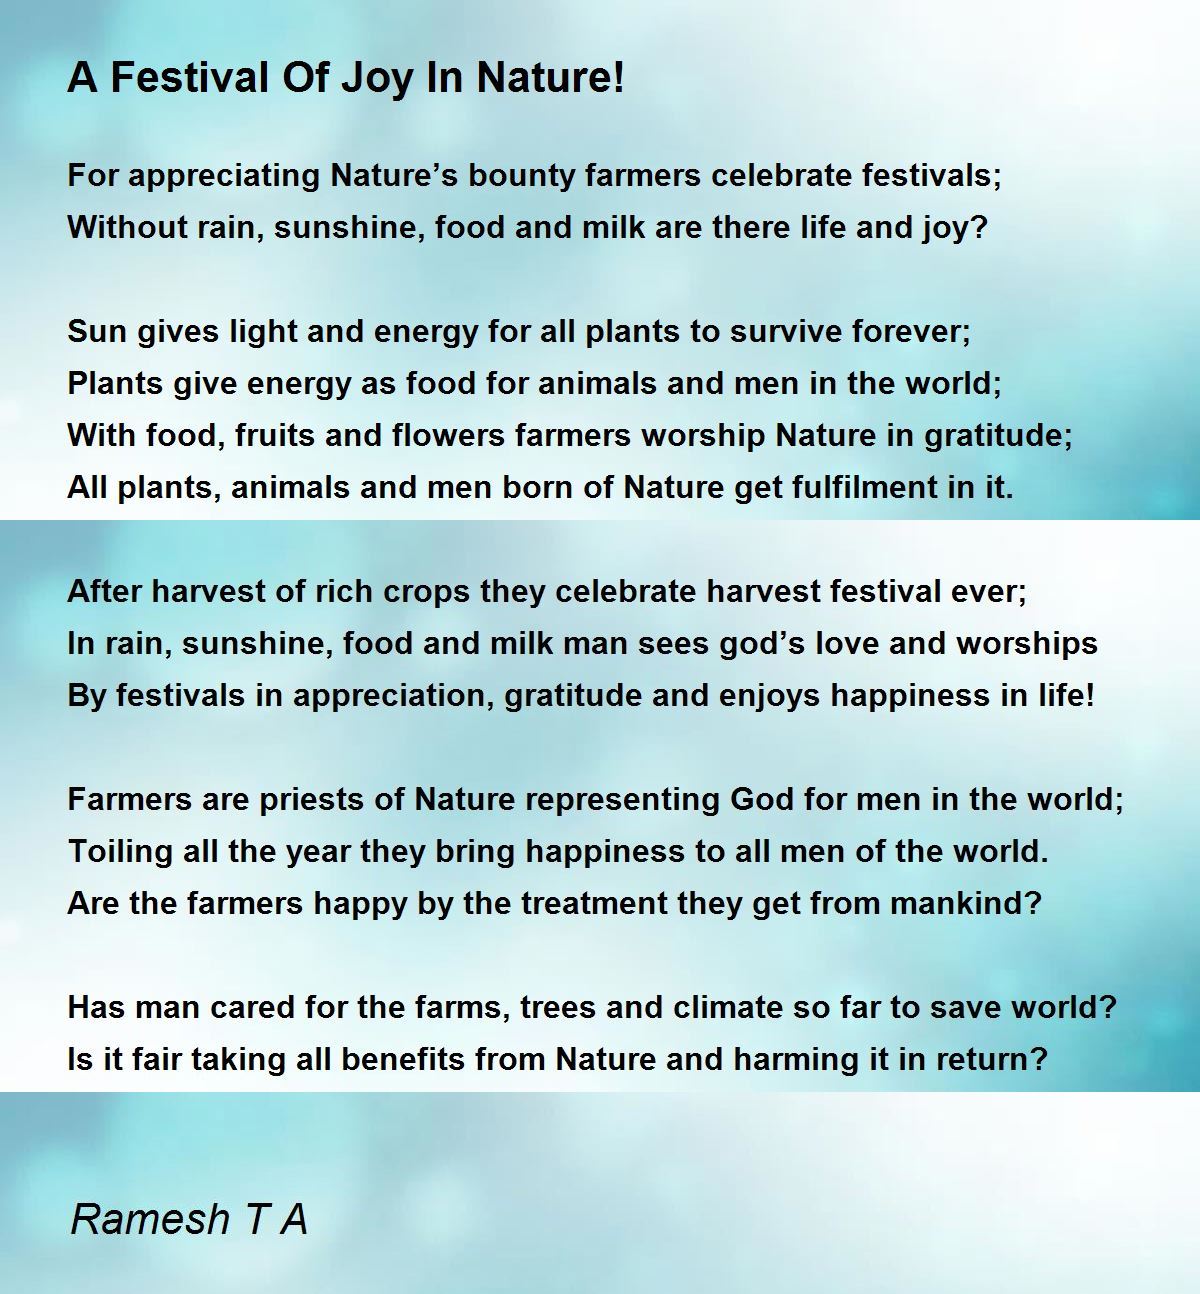 A Festival Of Joy In Nature! - A Festival Of Joy In Nature! Poem by Ramesh  T A